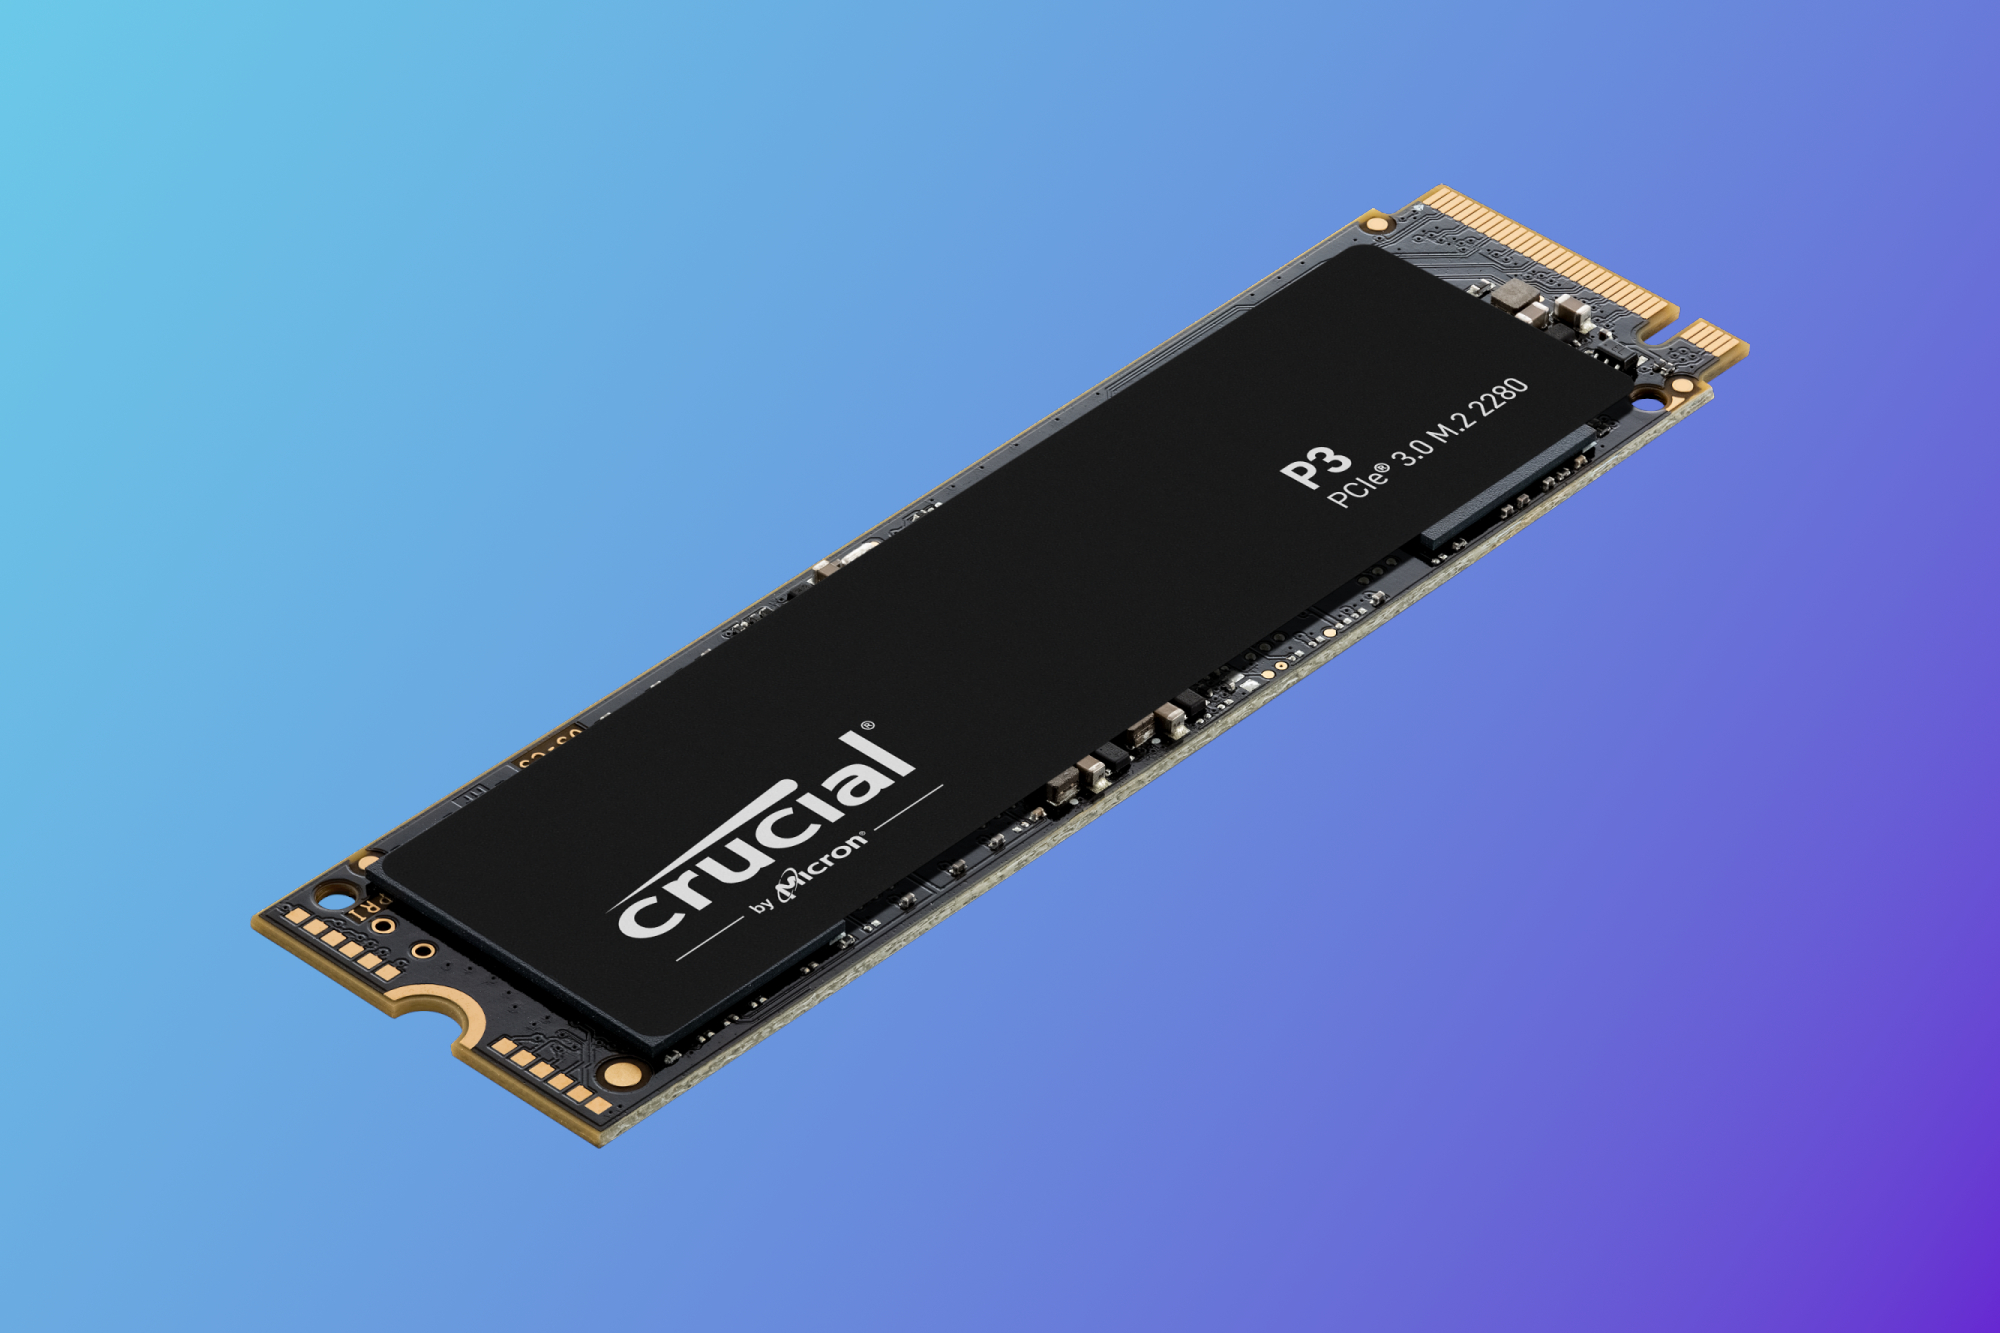 Crucial P3 - Best PCIe 3.0 SSD